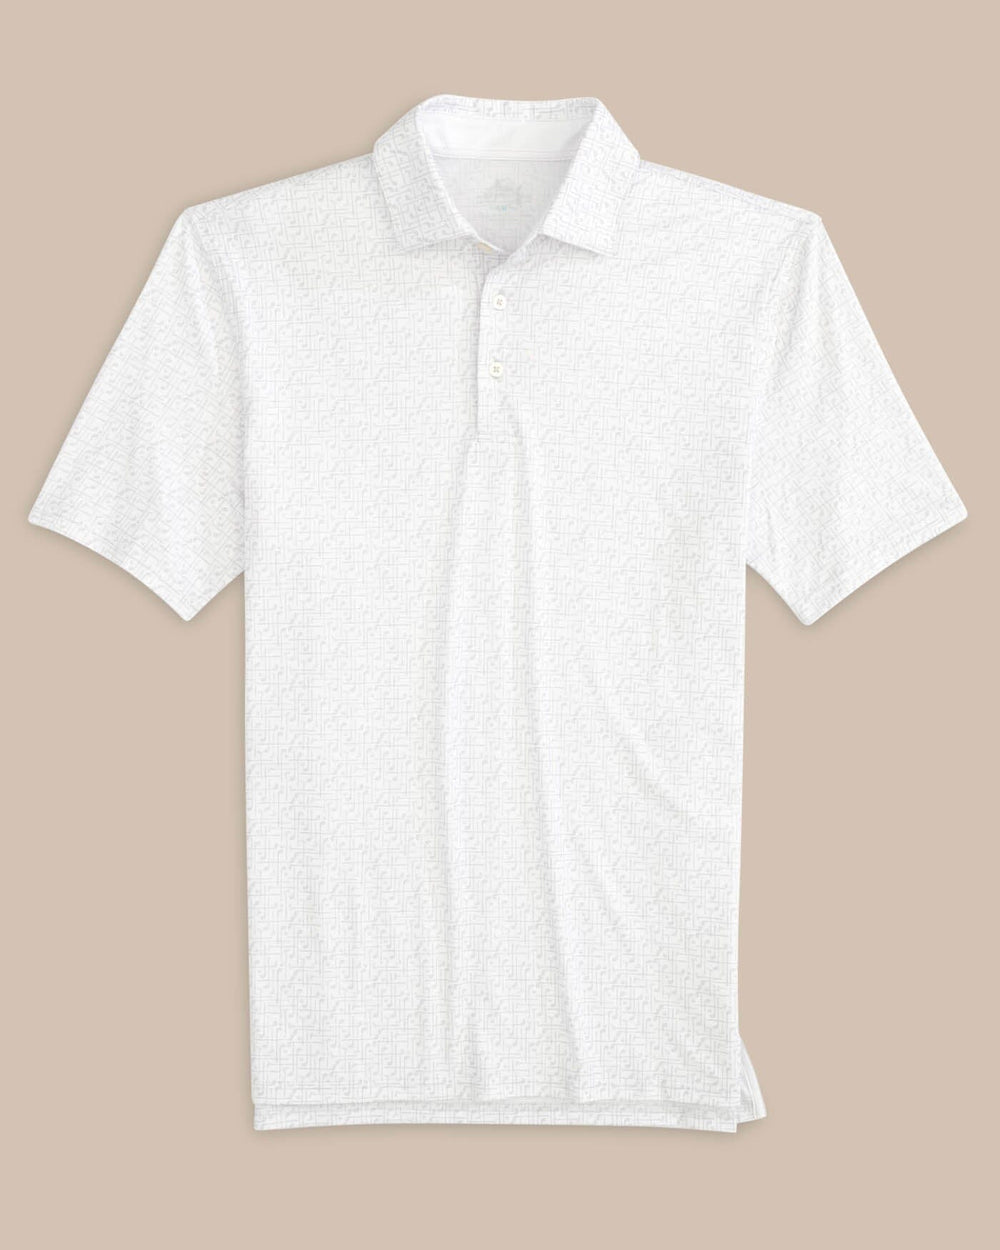 The front view of the Southern Tide Driver Over Clubbing Print Performance Polo Shirt by Southern Tide - Classic White